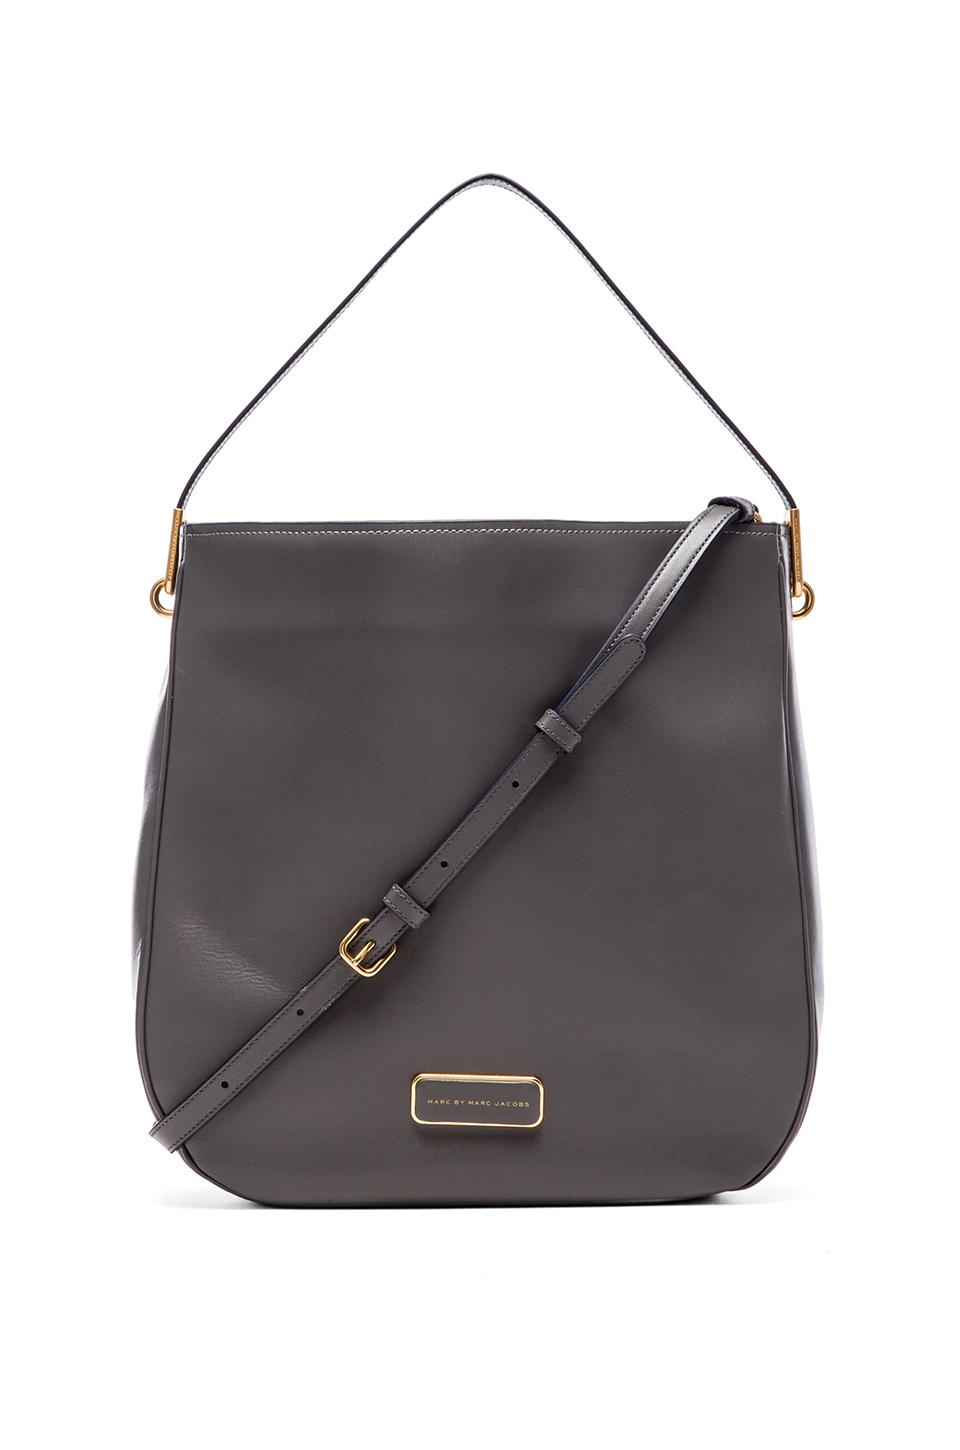 Lyst - Marc By Marc Jacobs Ligero Hobo Bag in Gray